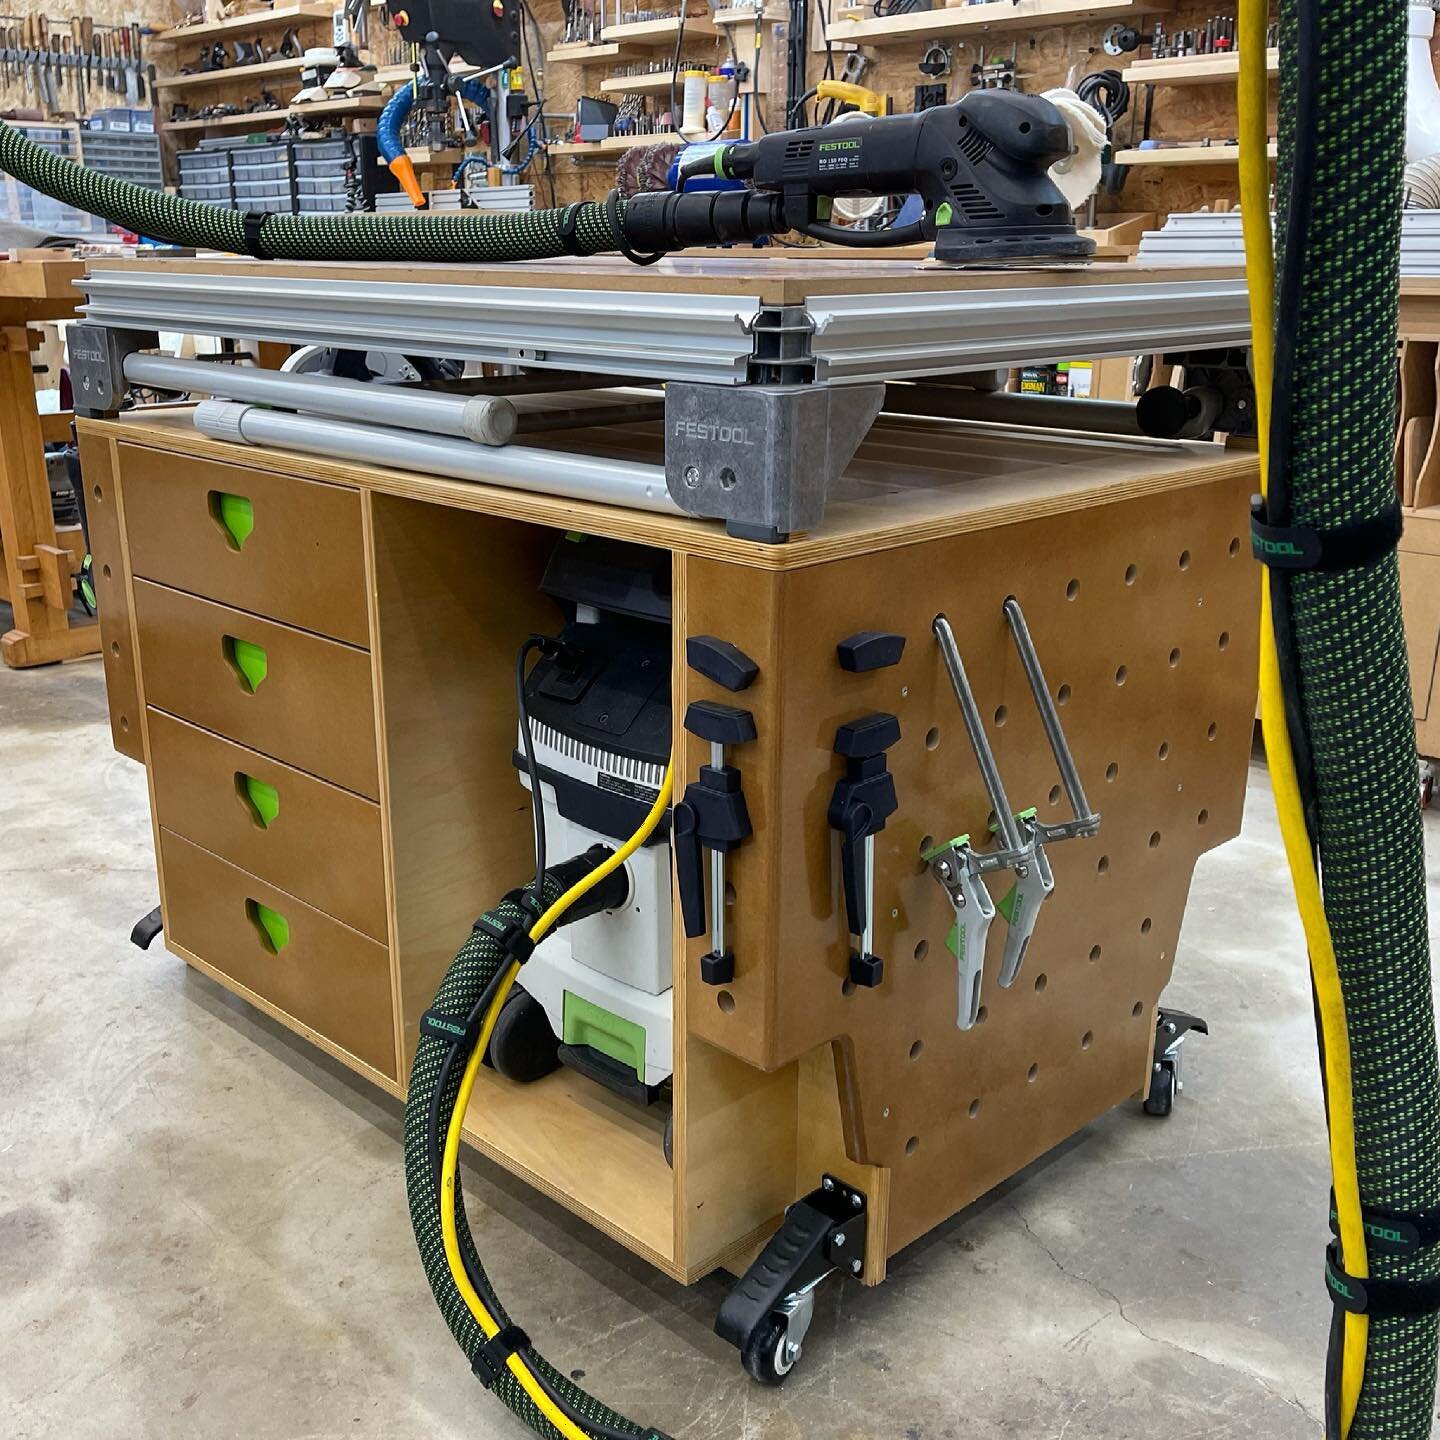 Shop bench for the #festool #mft.  I&rsquo;ve been chipping away on this between jobs for a while.  Just about done with it. 
.
.
.
#mftbench #woodshop #woodworking #powertools #shopbench #bench #woodwork #festoolfan #festooldomino #festoolsander #du